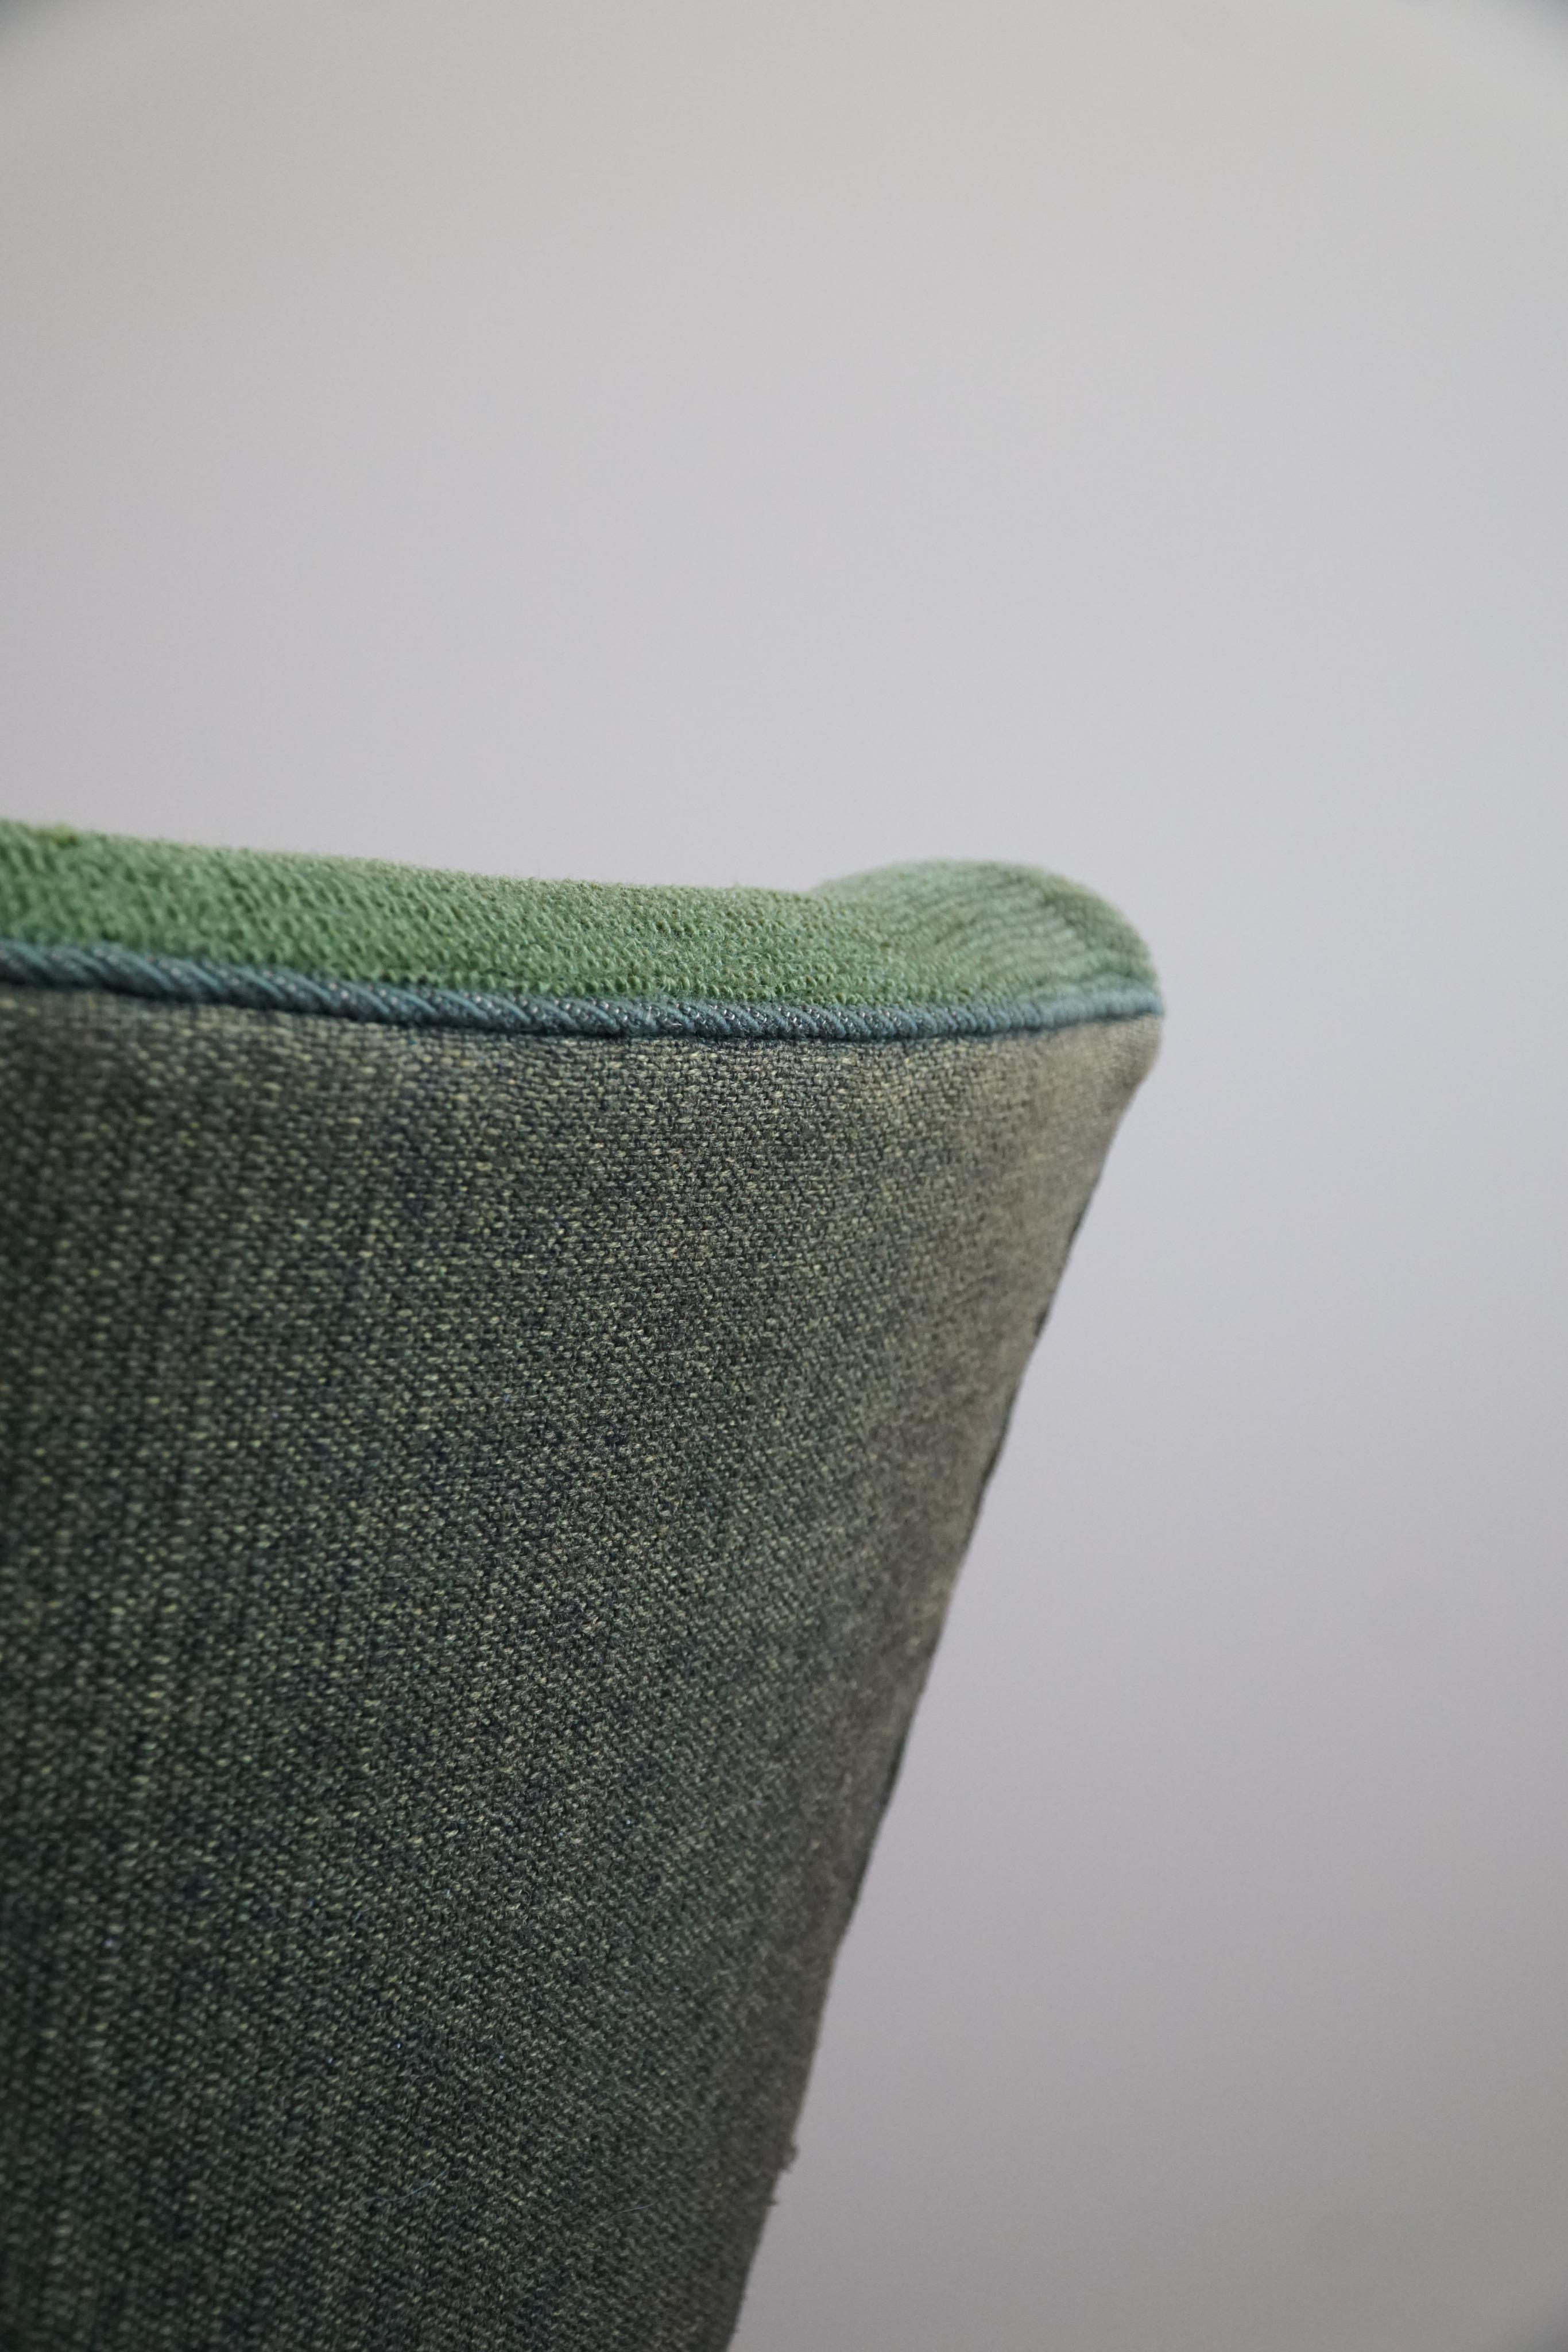 Mid Century Modern Easy Chair in Beech & Green Fabric, Danish Cabinetmaker, 1940 For Sale 10